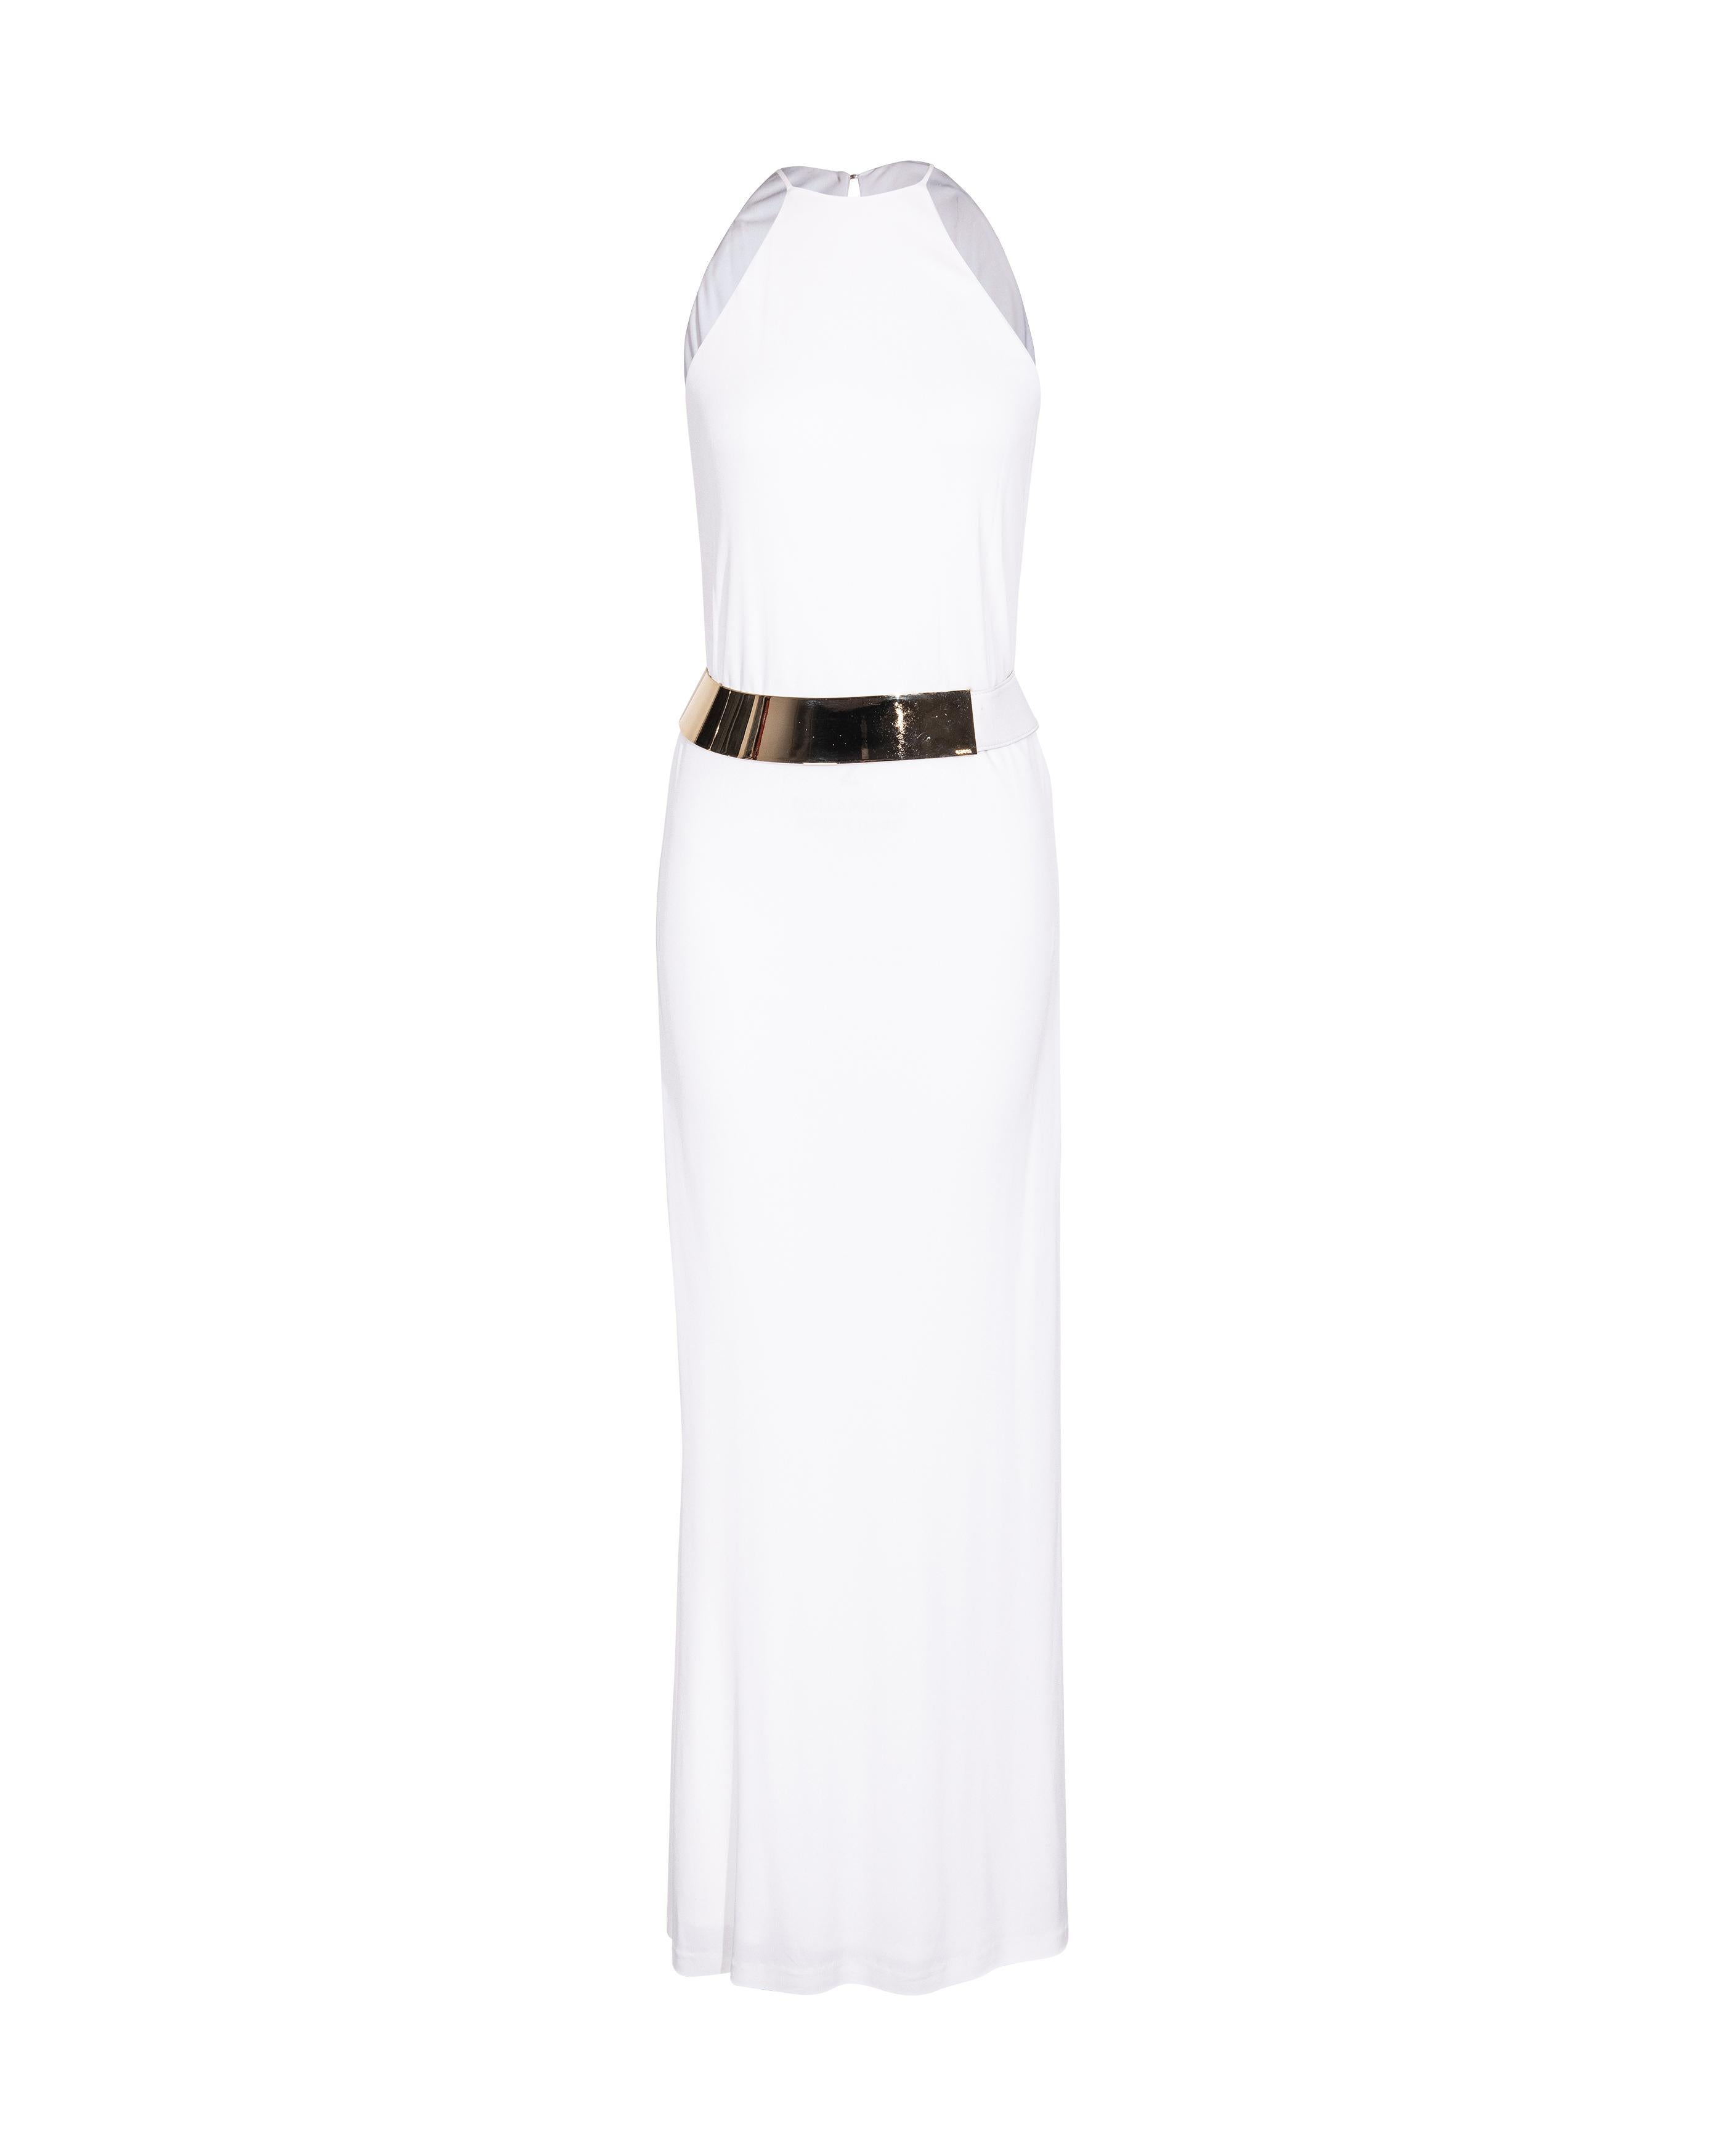 A/W 1996 Gucci by Tom Ford White Gown with Curved Gold Belt 5